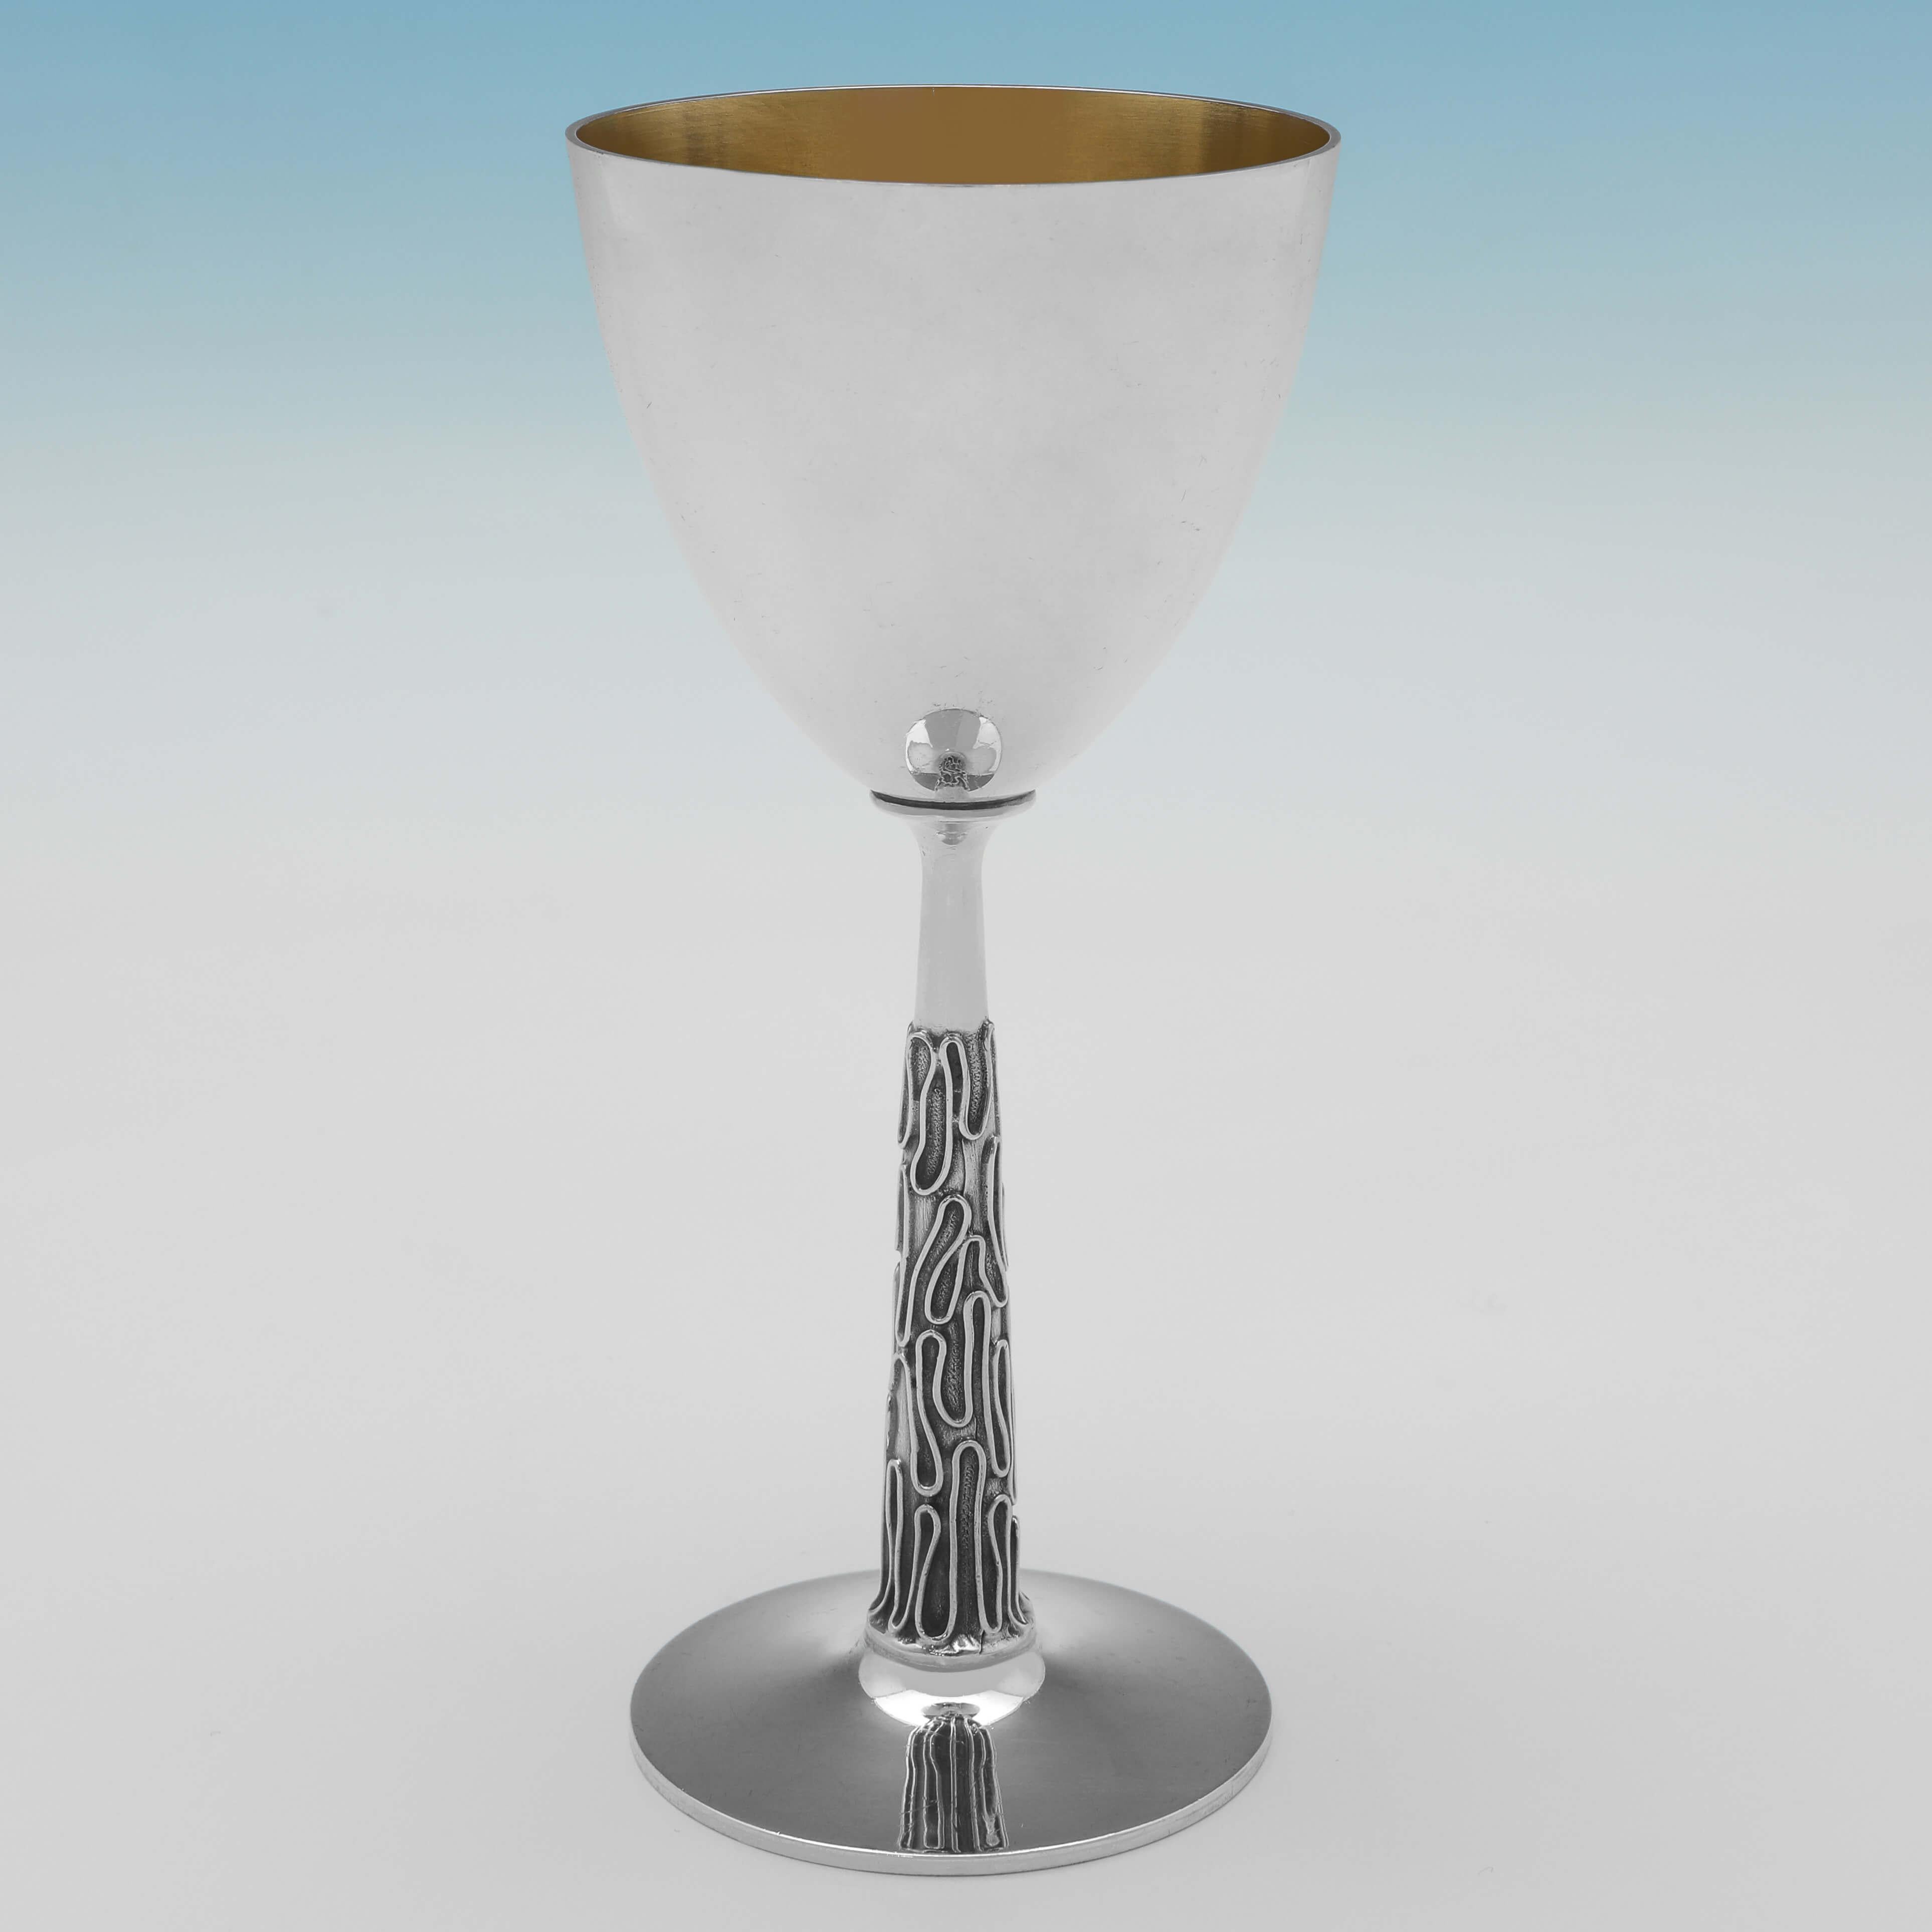 Hallmarked in London in 1978 by George Edward Grant, this stylish set of 8 Modernist design, Sterling Silver Goblets, features textured stems, and gilt interiors. 

Each goblet measures 6.75